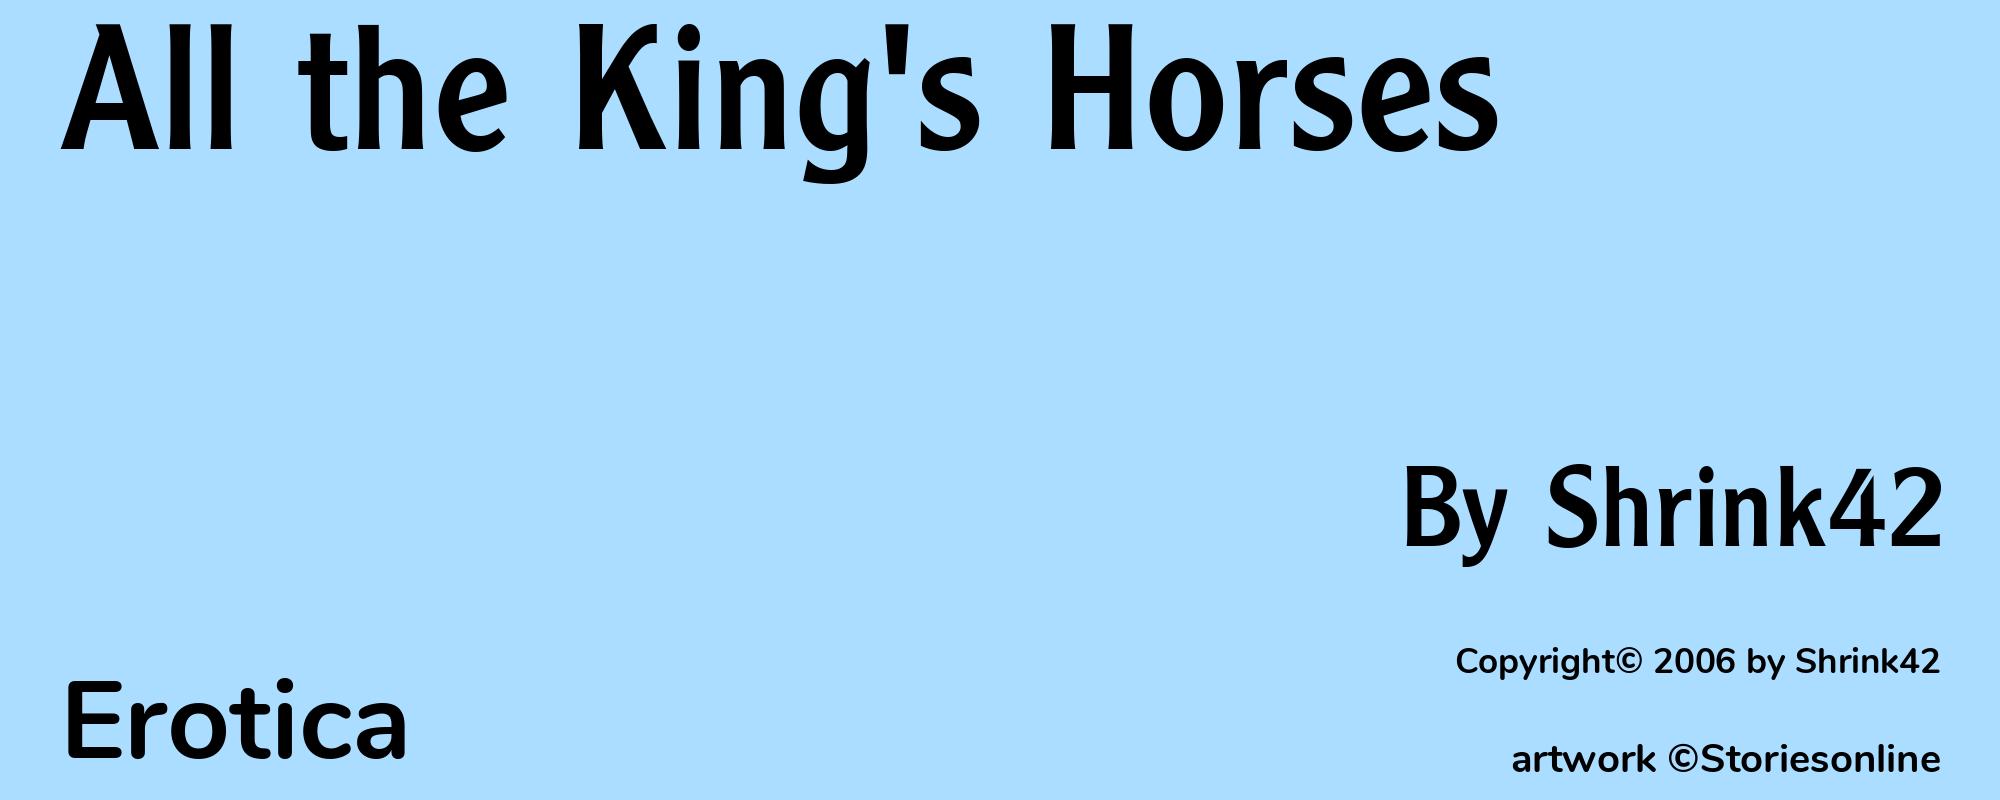 All the King's Horses - Cover